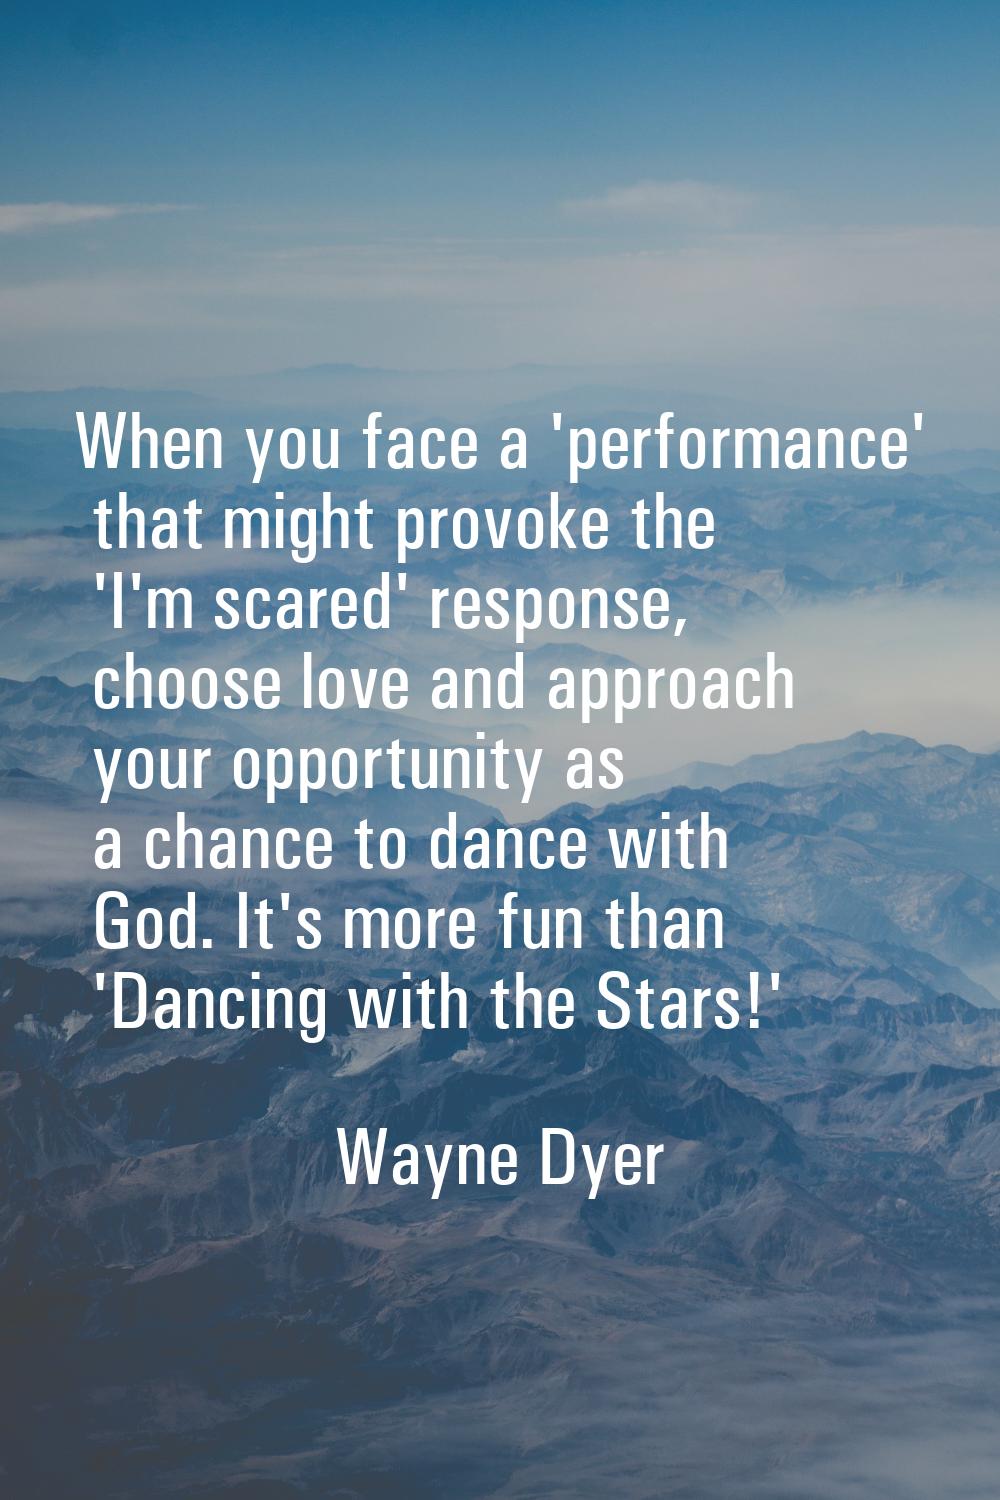 When you face a 'performance' that might provoke the 'I'm scared' response, choose love and approac